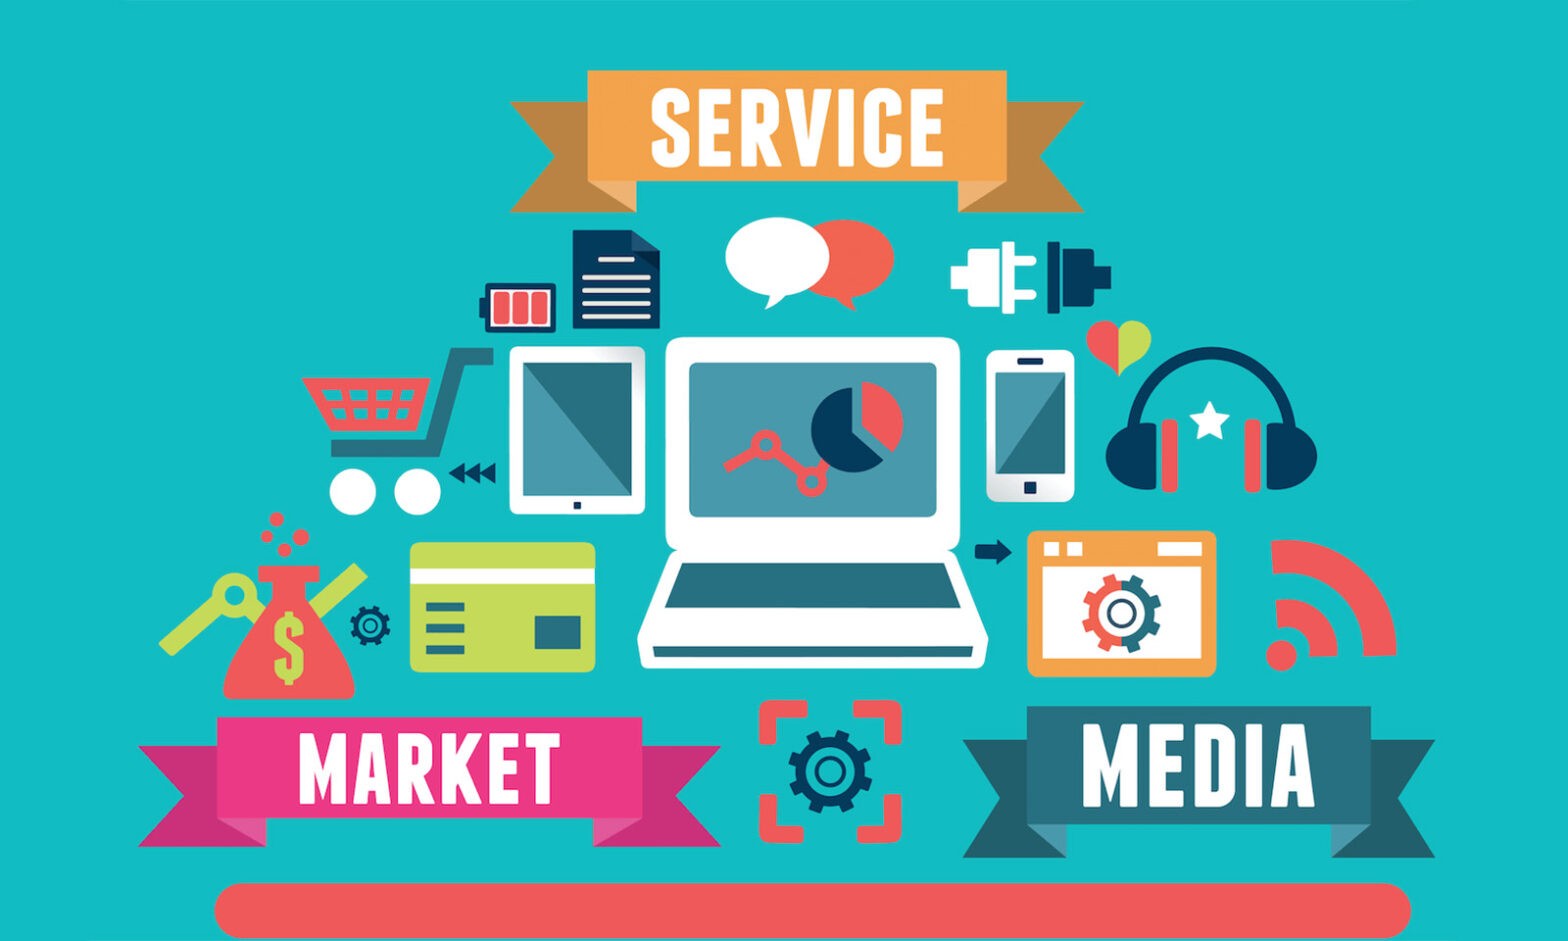 What is Service Based Business Marketing